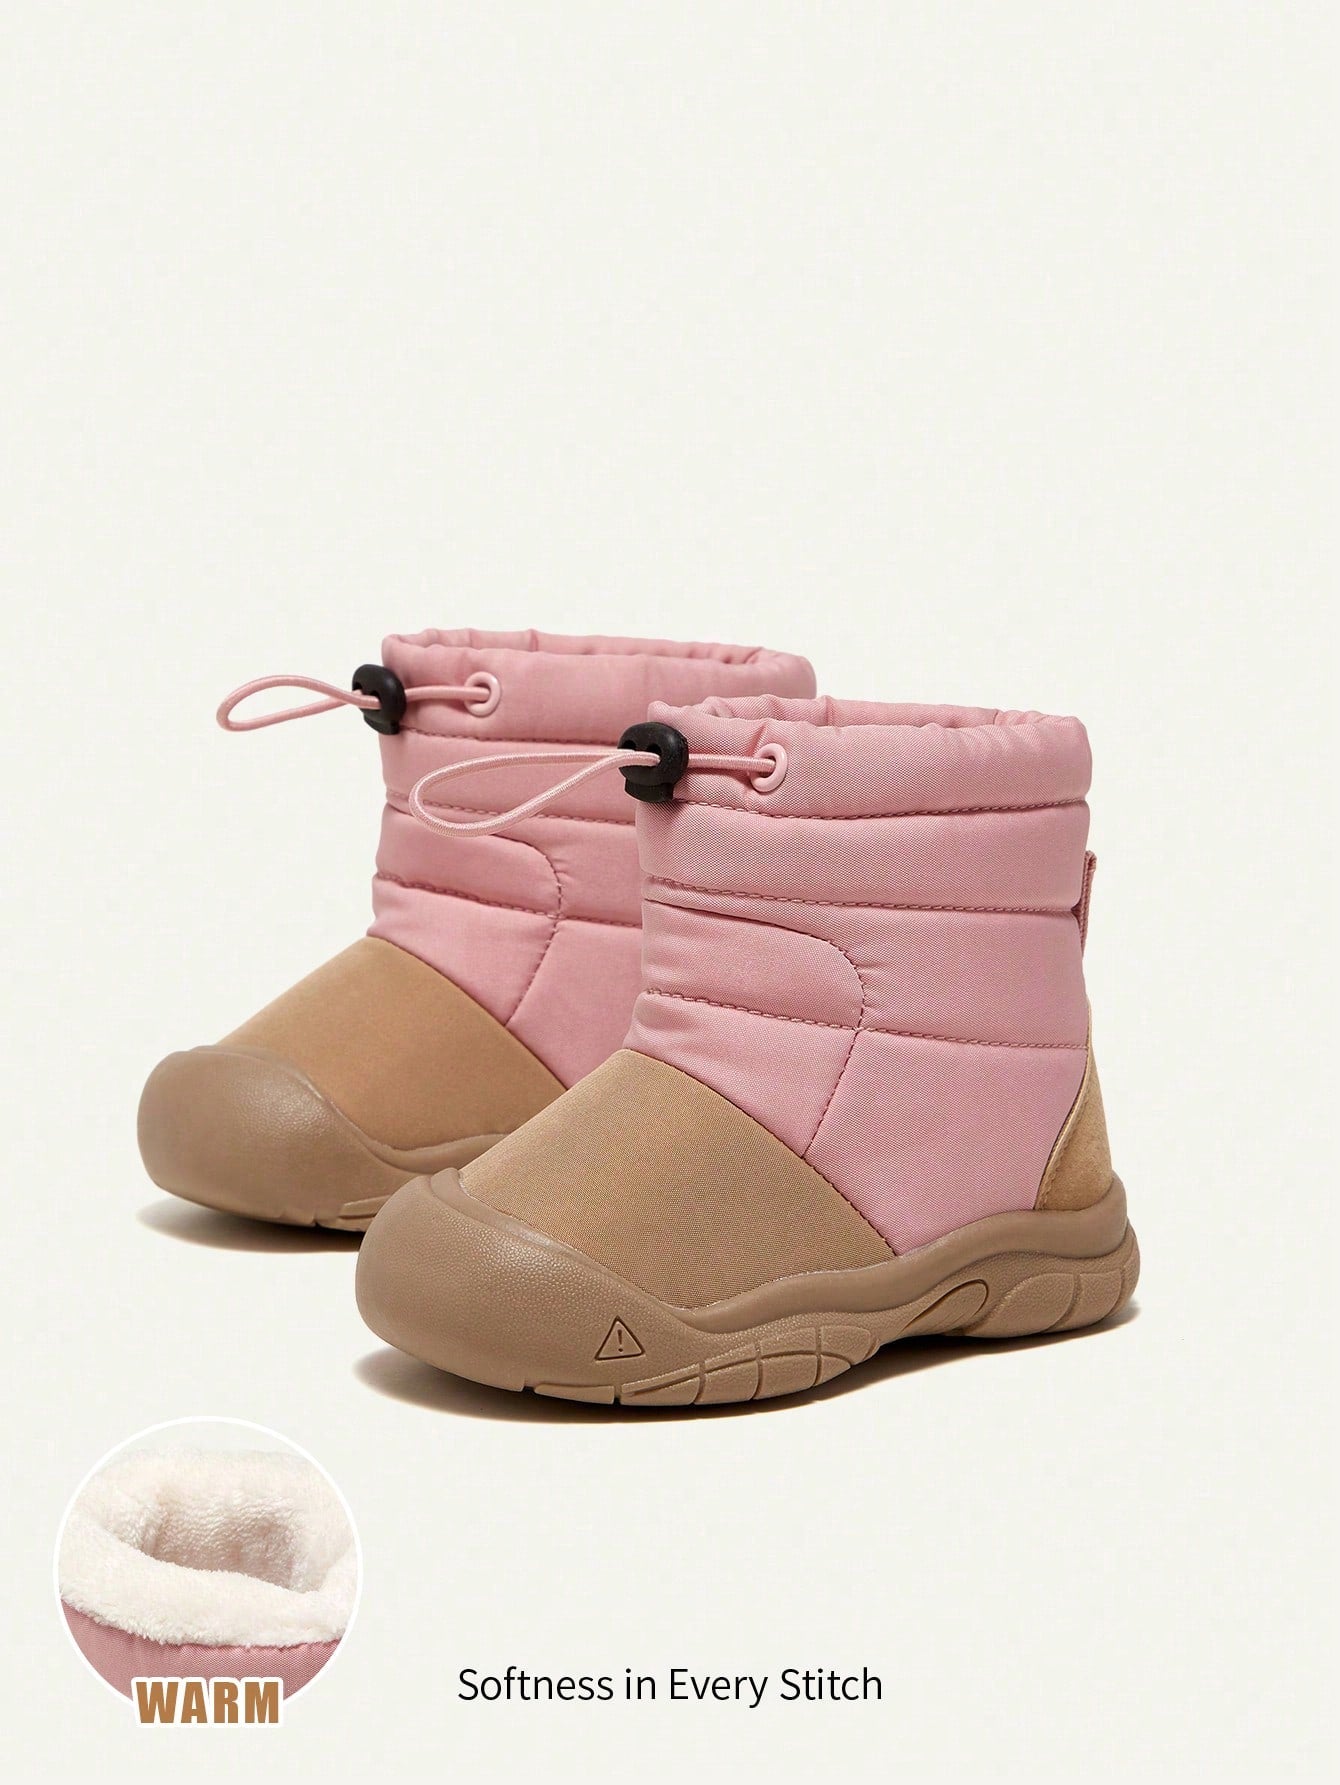 Girls' Fashionable And Stylish Pink Shoes, Comfortable & Warm Snow Boots